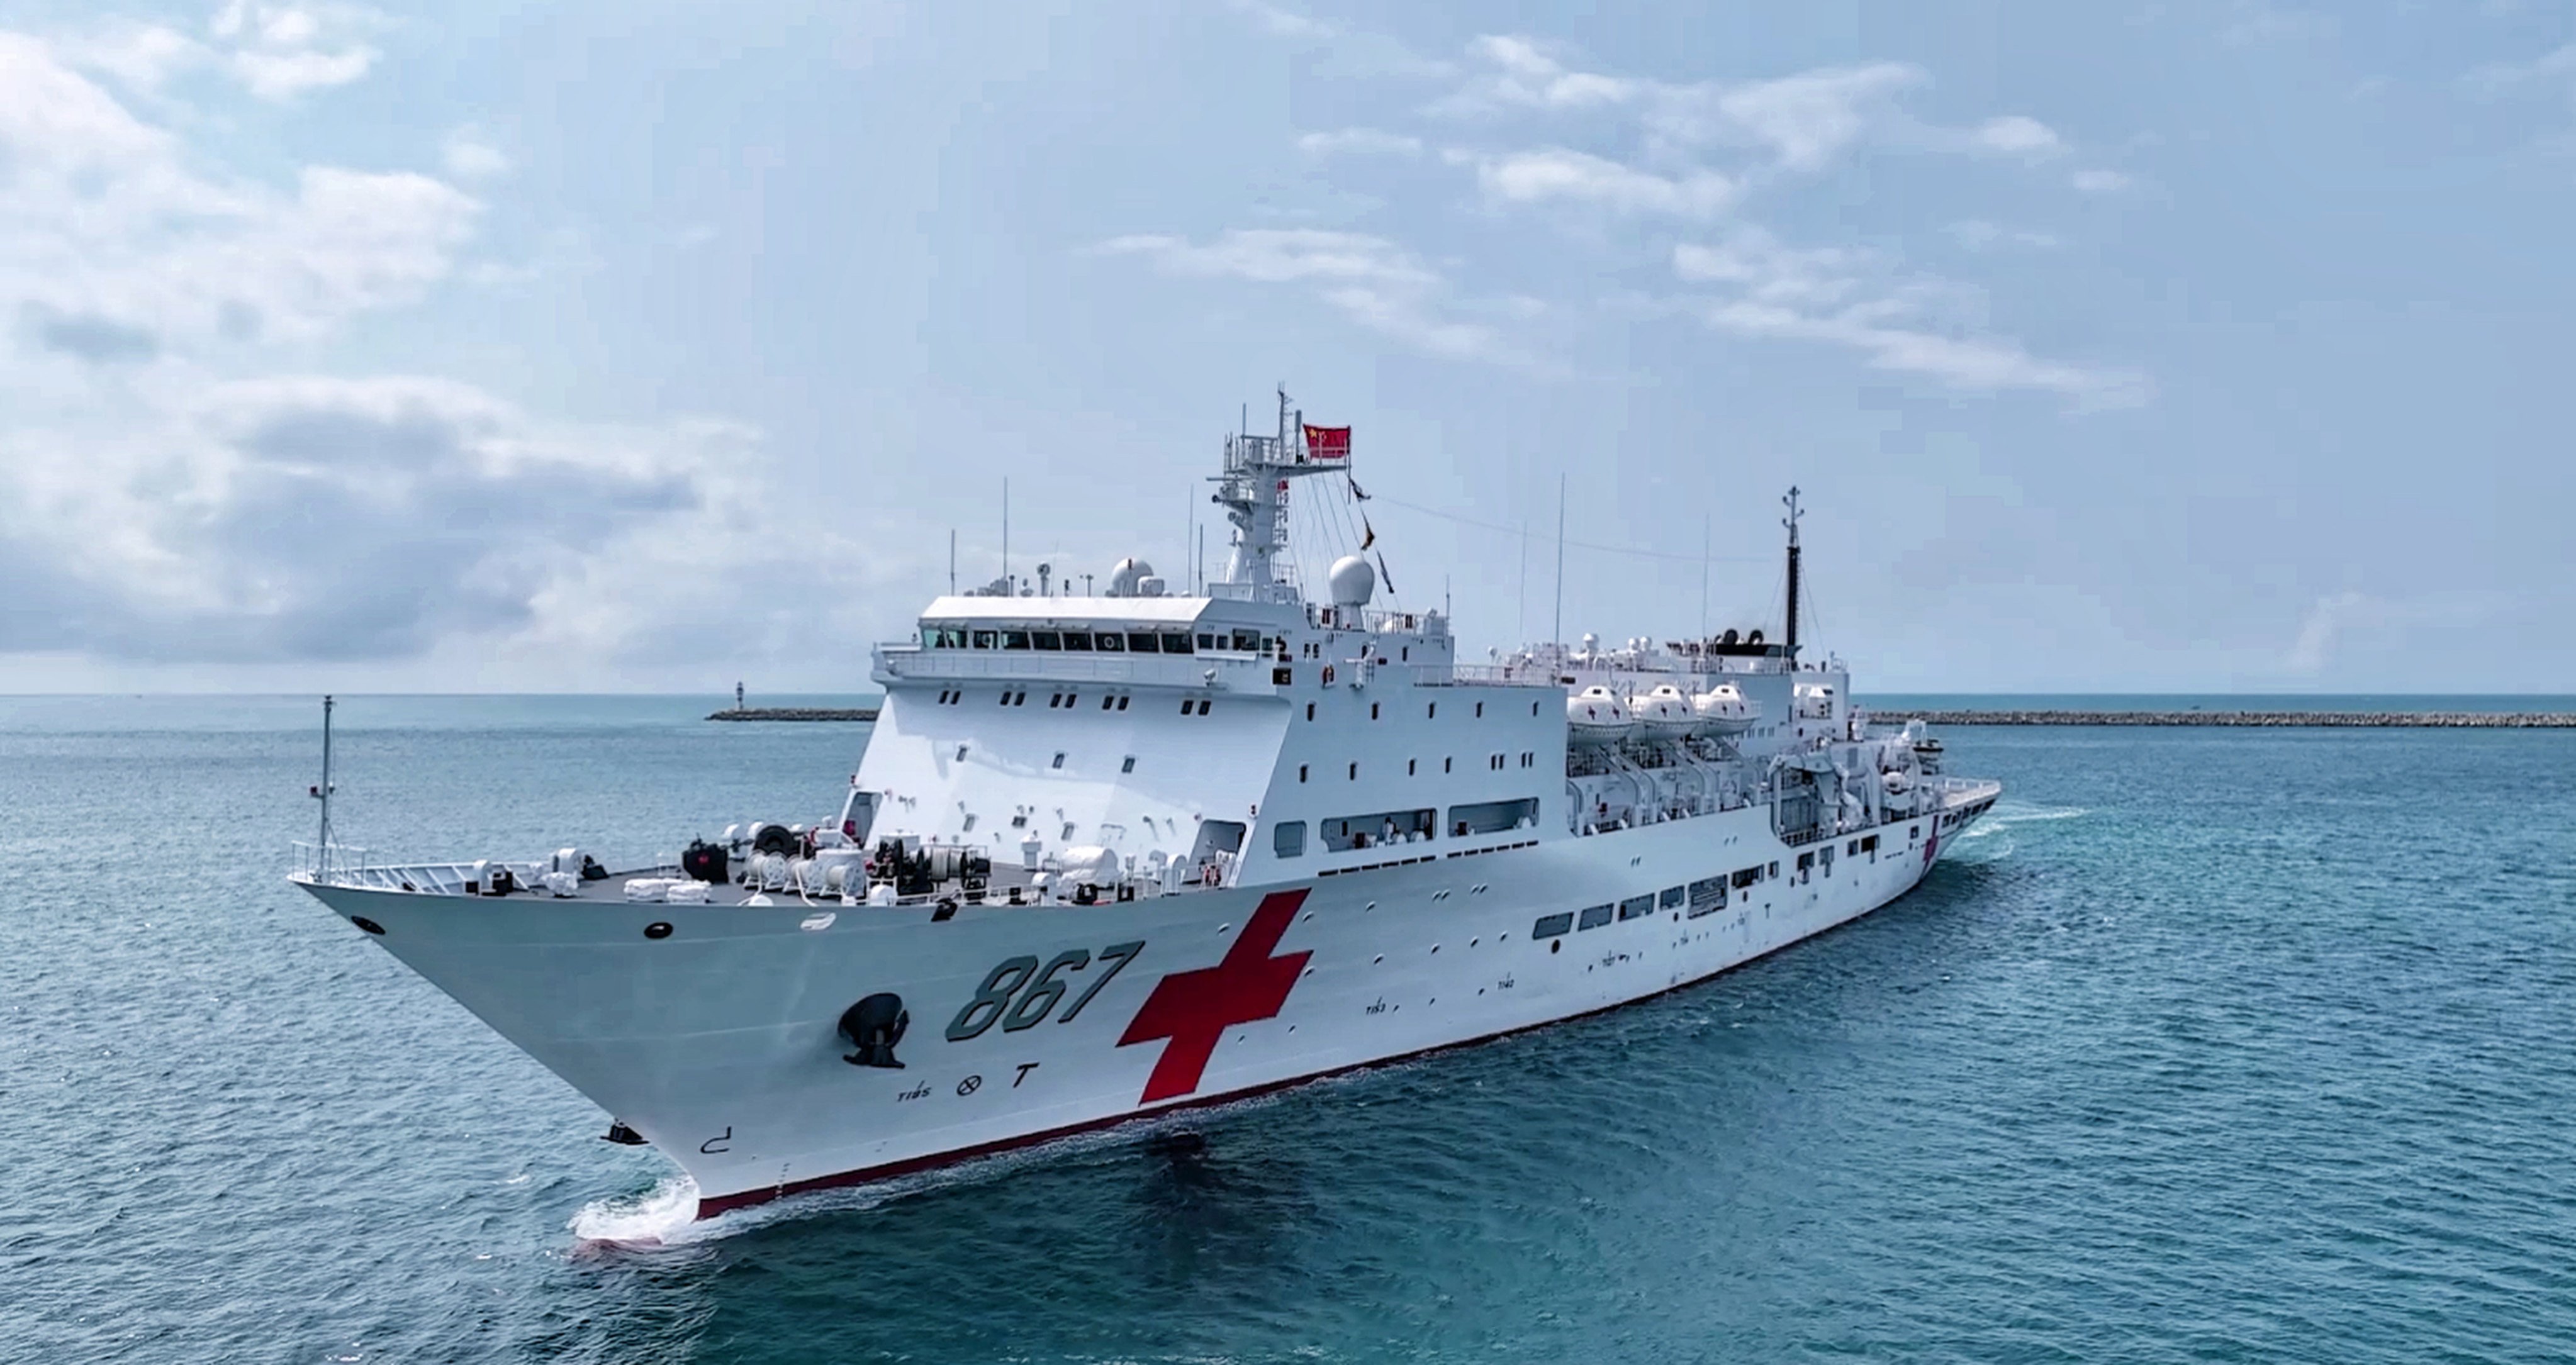 The Silk Road Ark, China’s newest and biggest hospital ship, made its public debut on Wednesday as it left  Zhanjiang for the islands and reefs in Paracel Islands and Spratly Islands to provide medical services. Photo: Weibo/央广军事